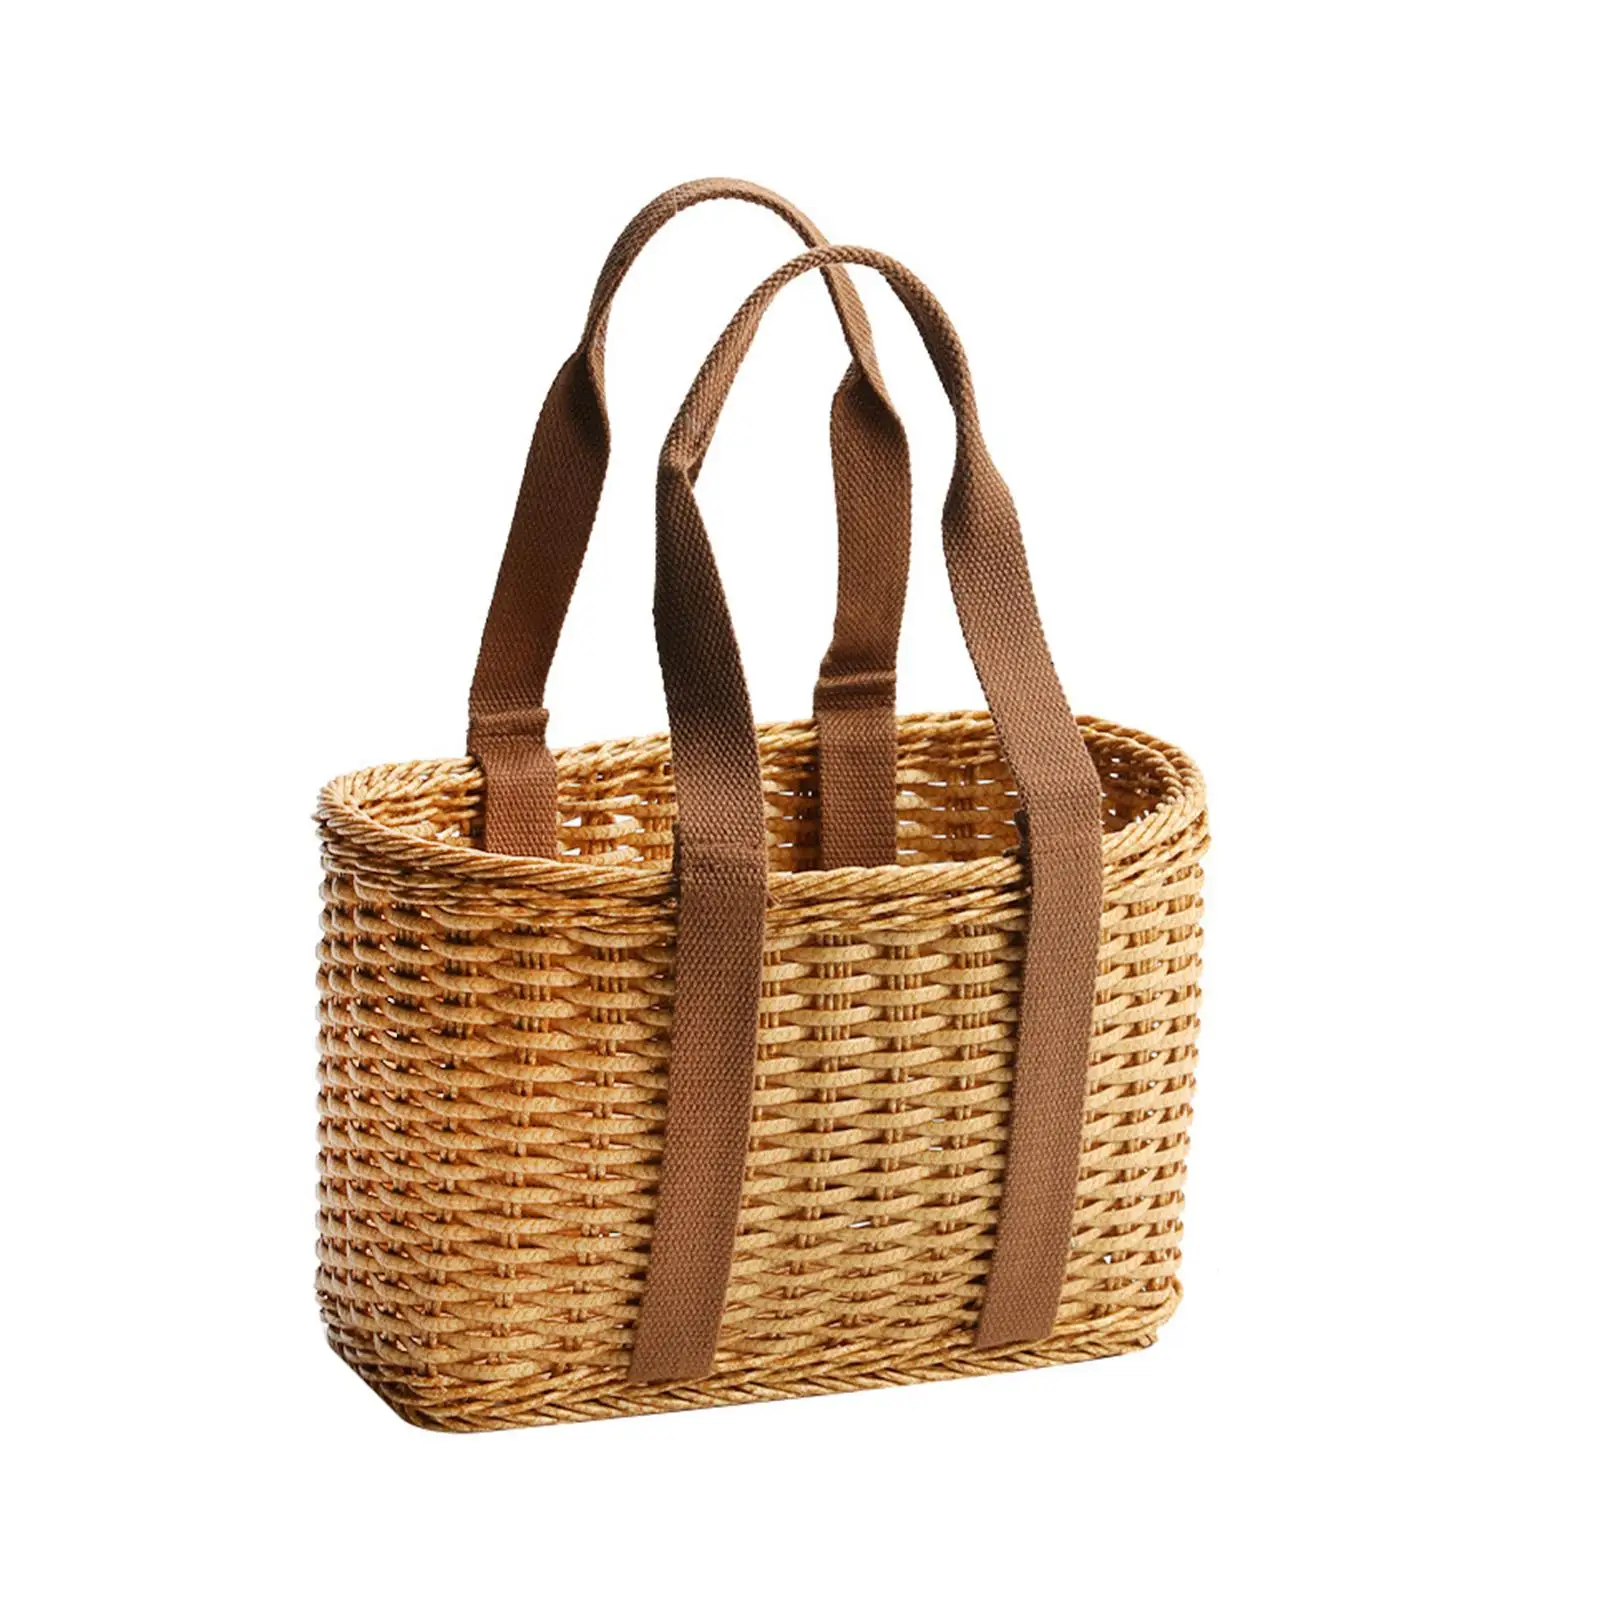 Woven Basket Stylish Durable with Handles Practical Handmade Picnic Baskets for Gardening Daily Necessities Camping